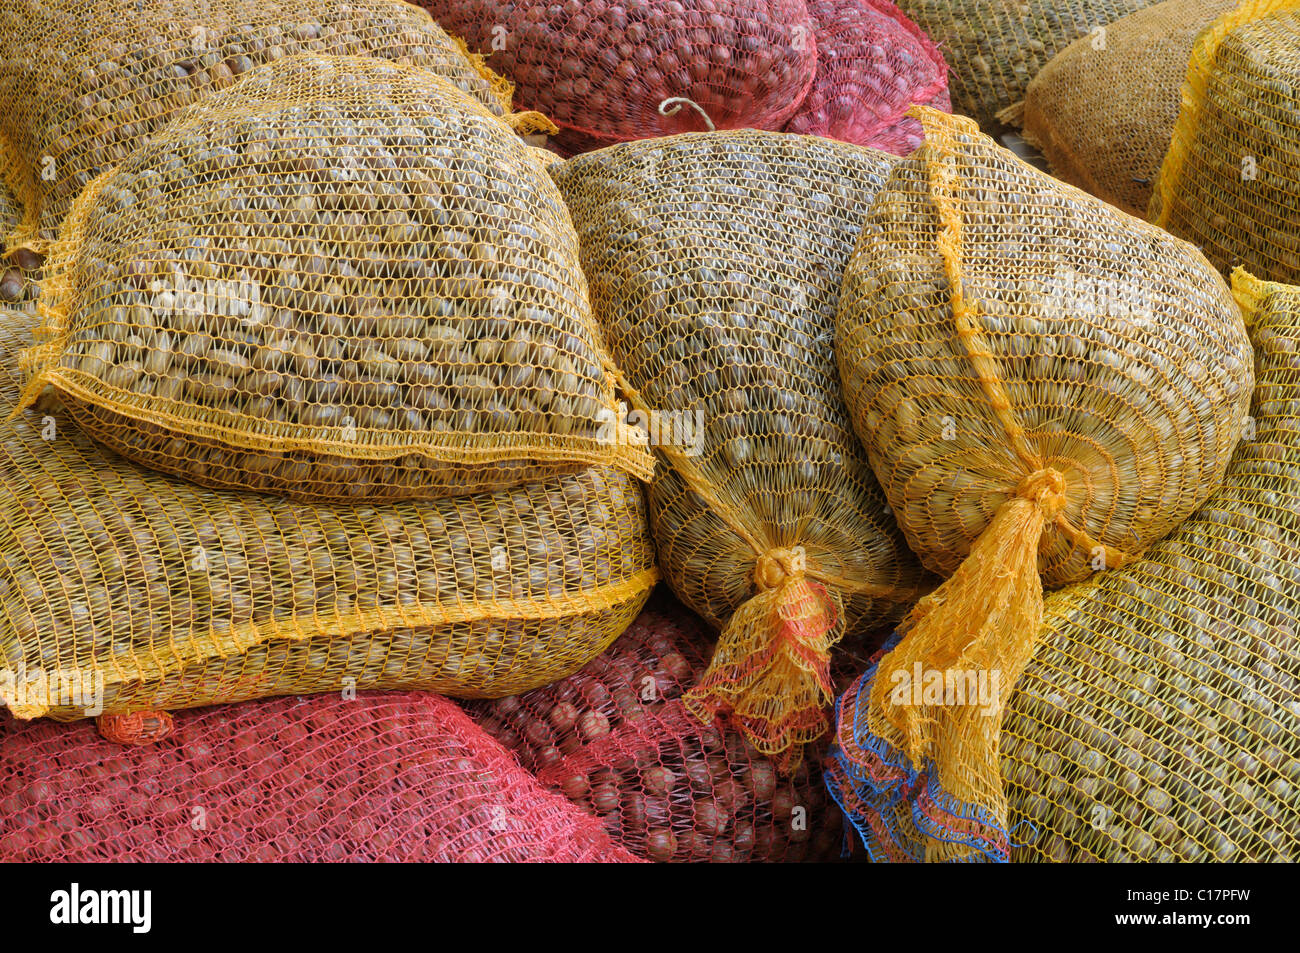 Stacked nets filled with with feed for game Stock Photo